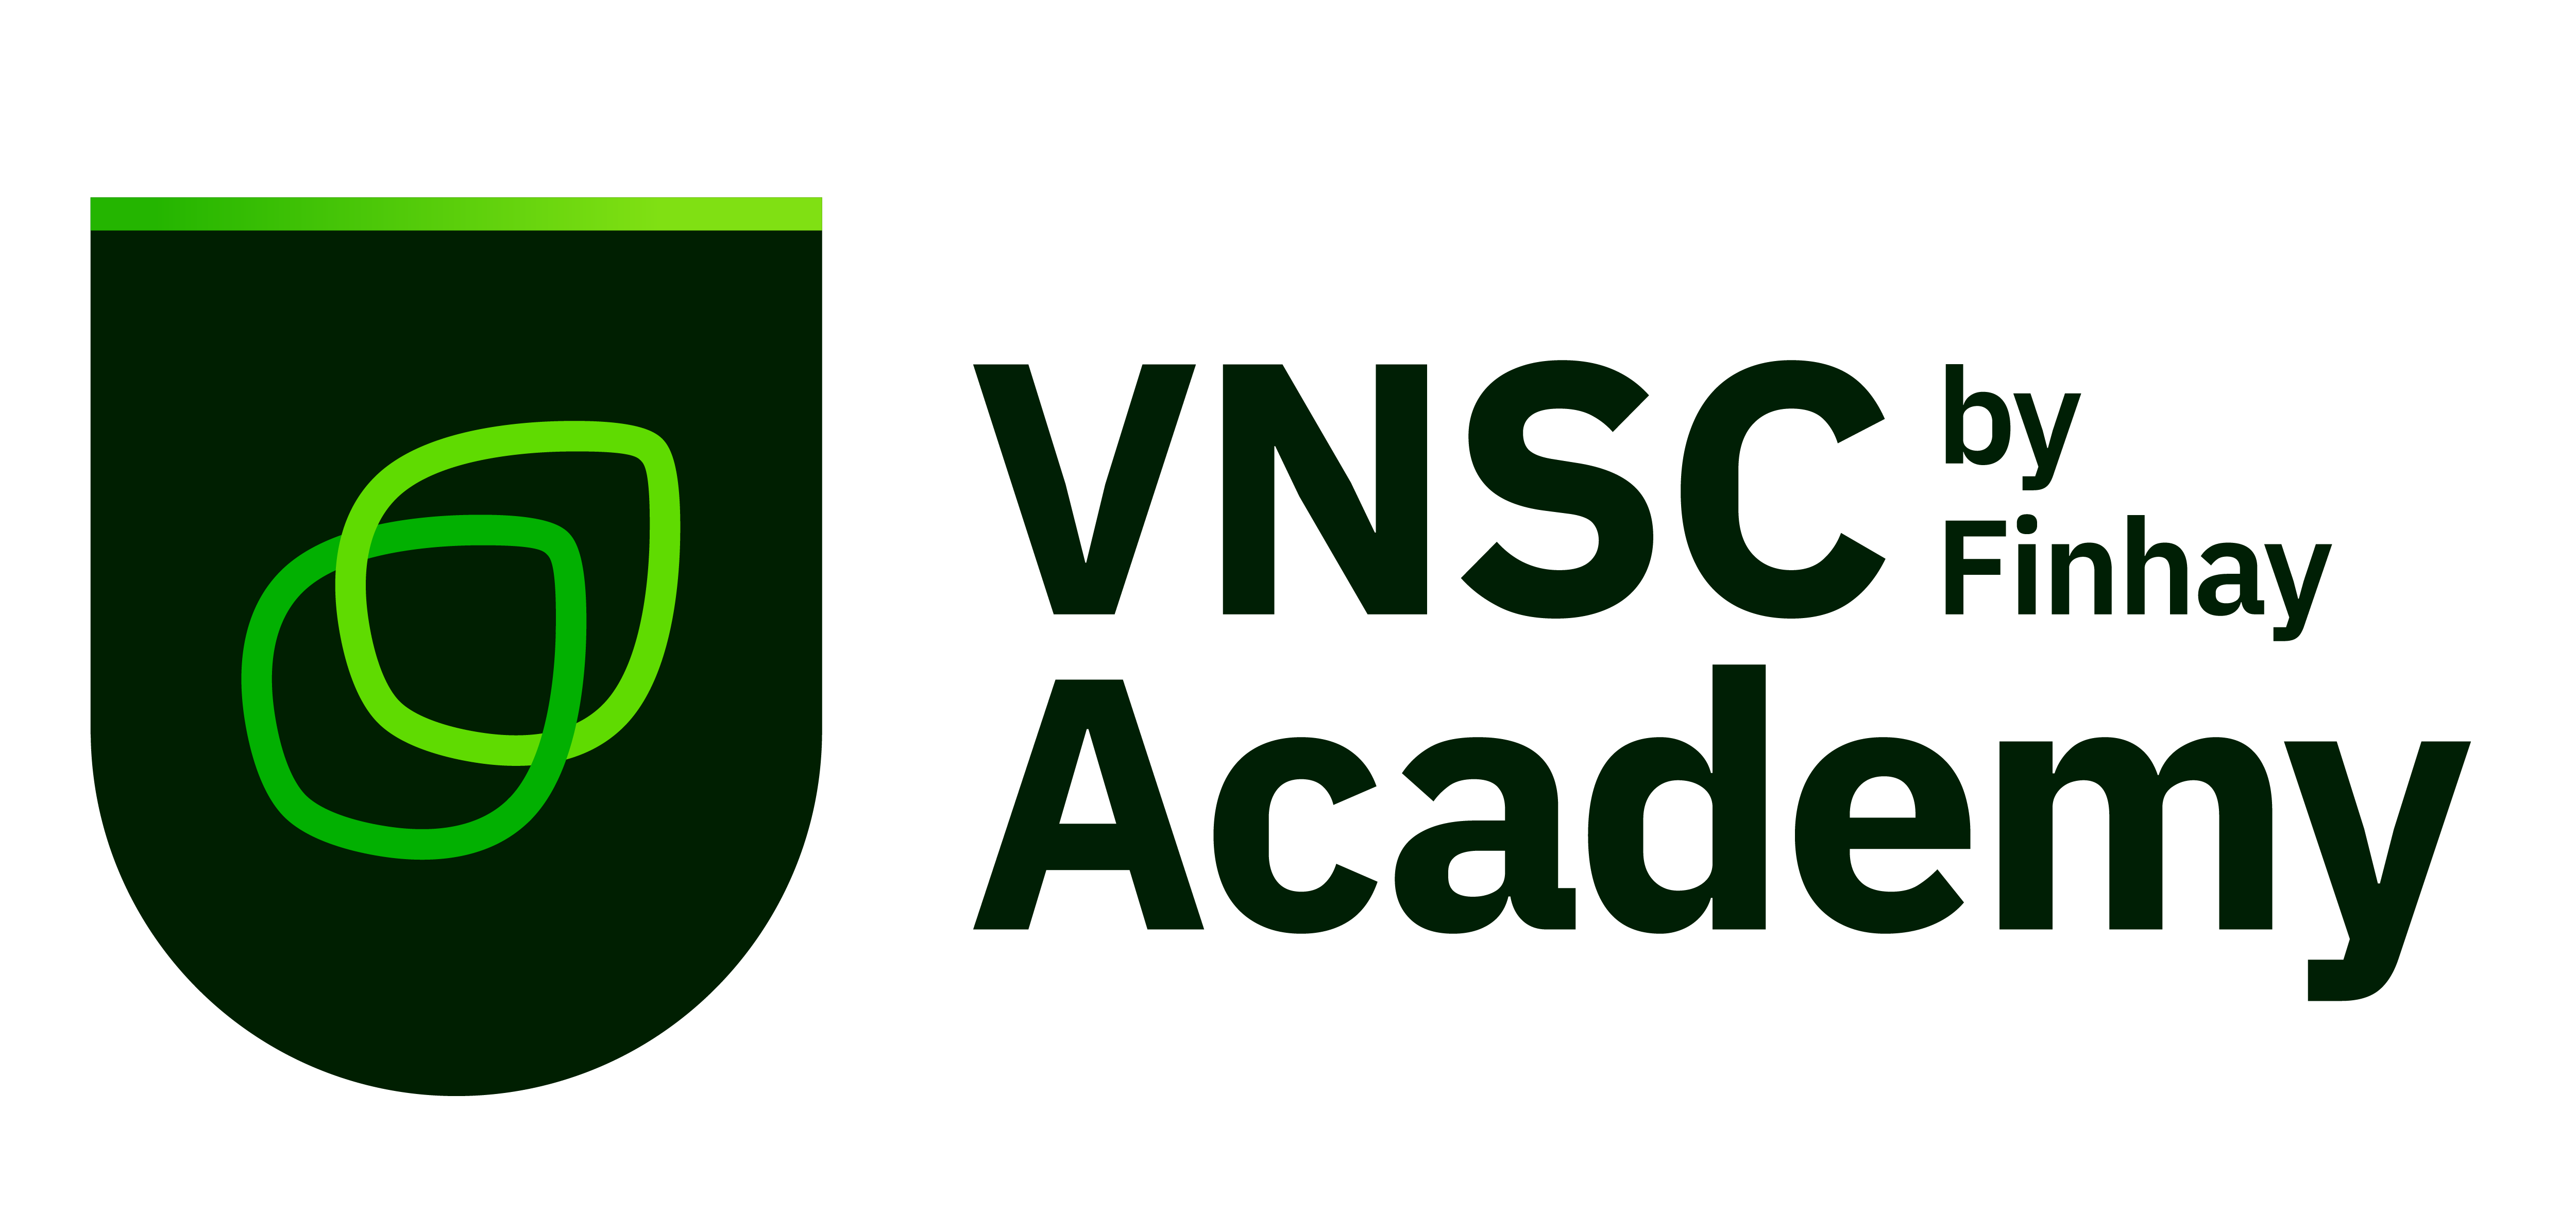 VNSC by Finhay Academy